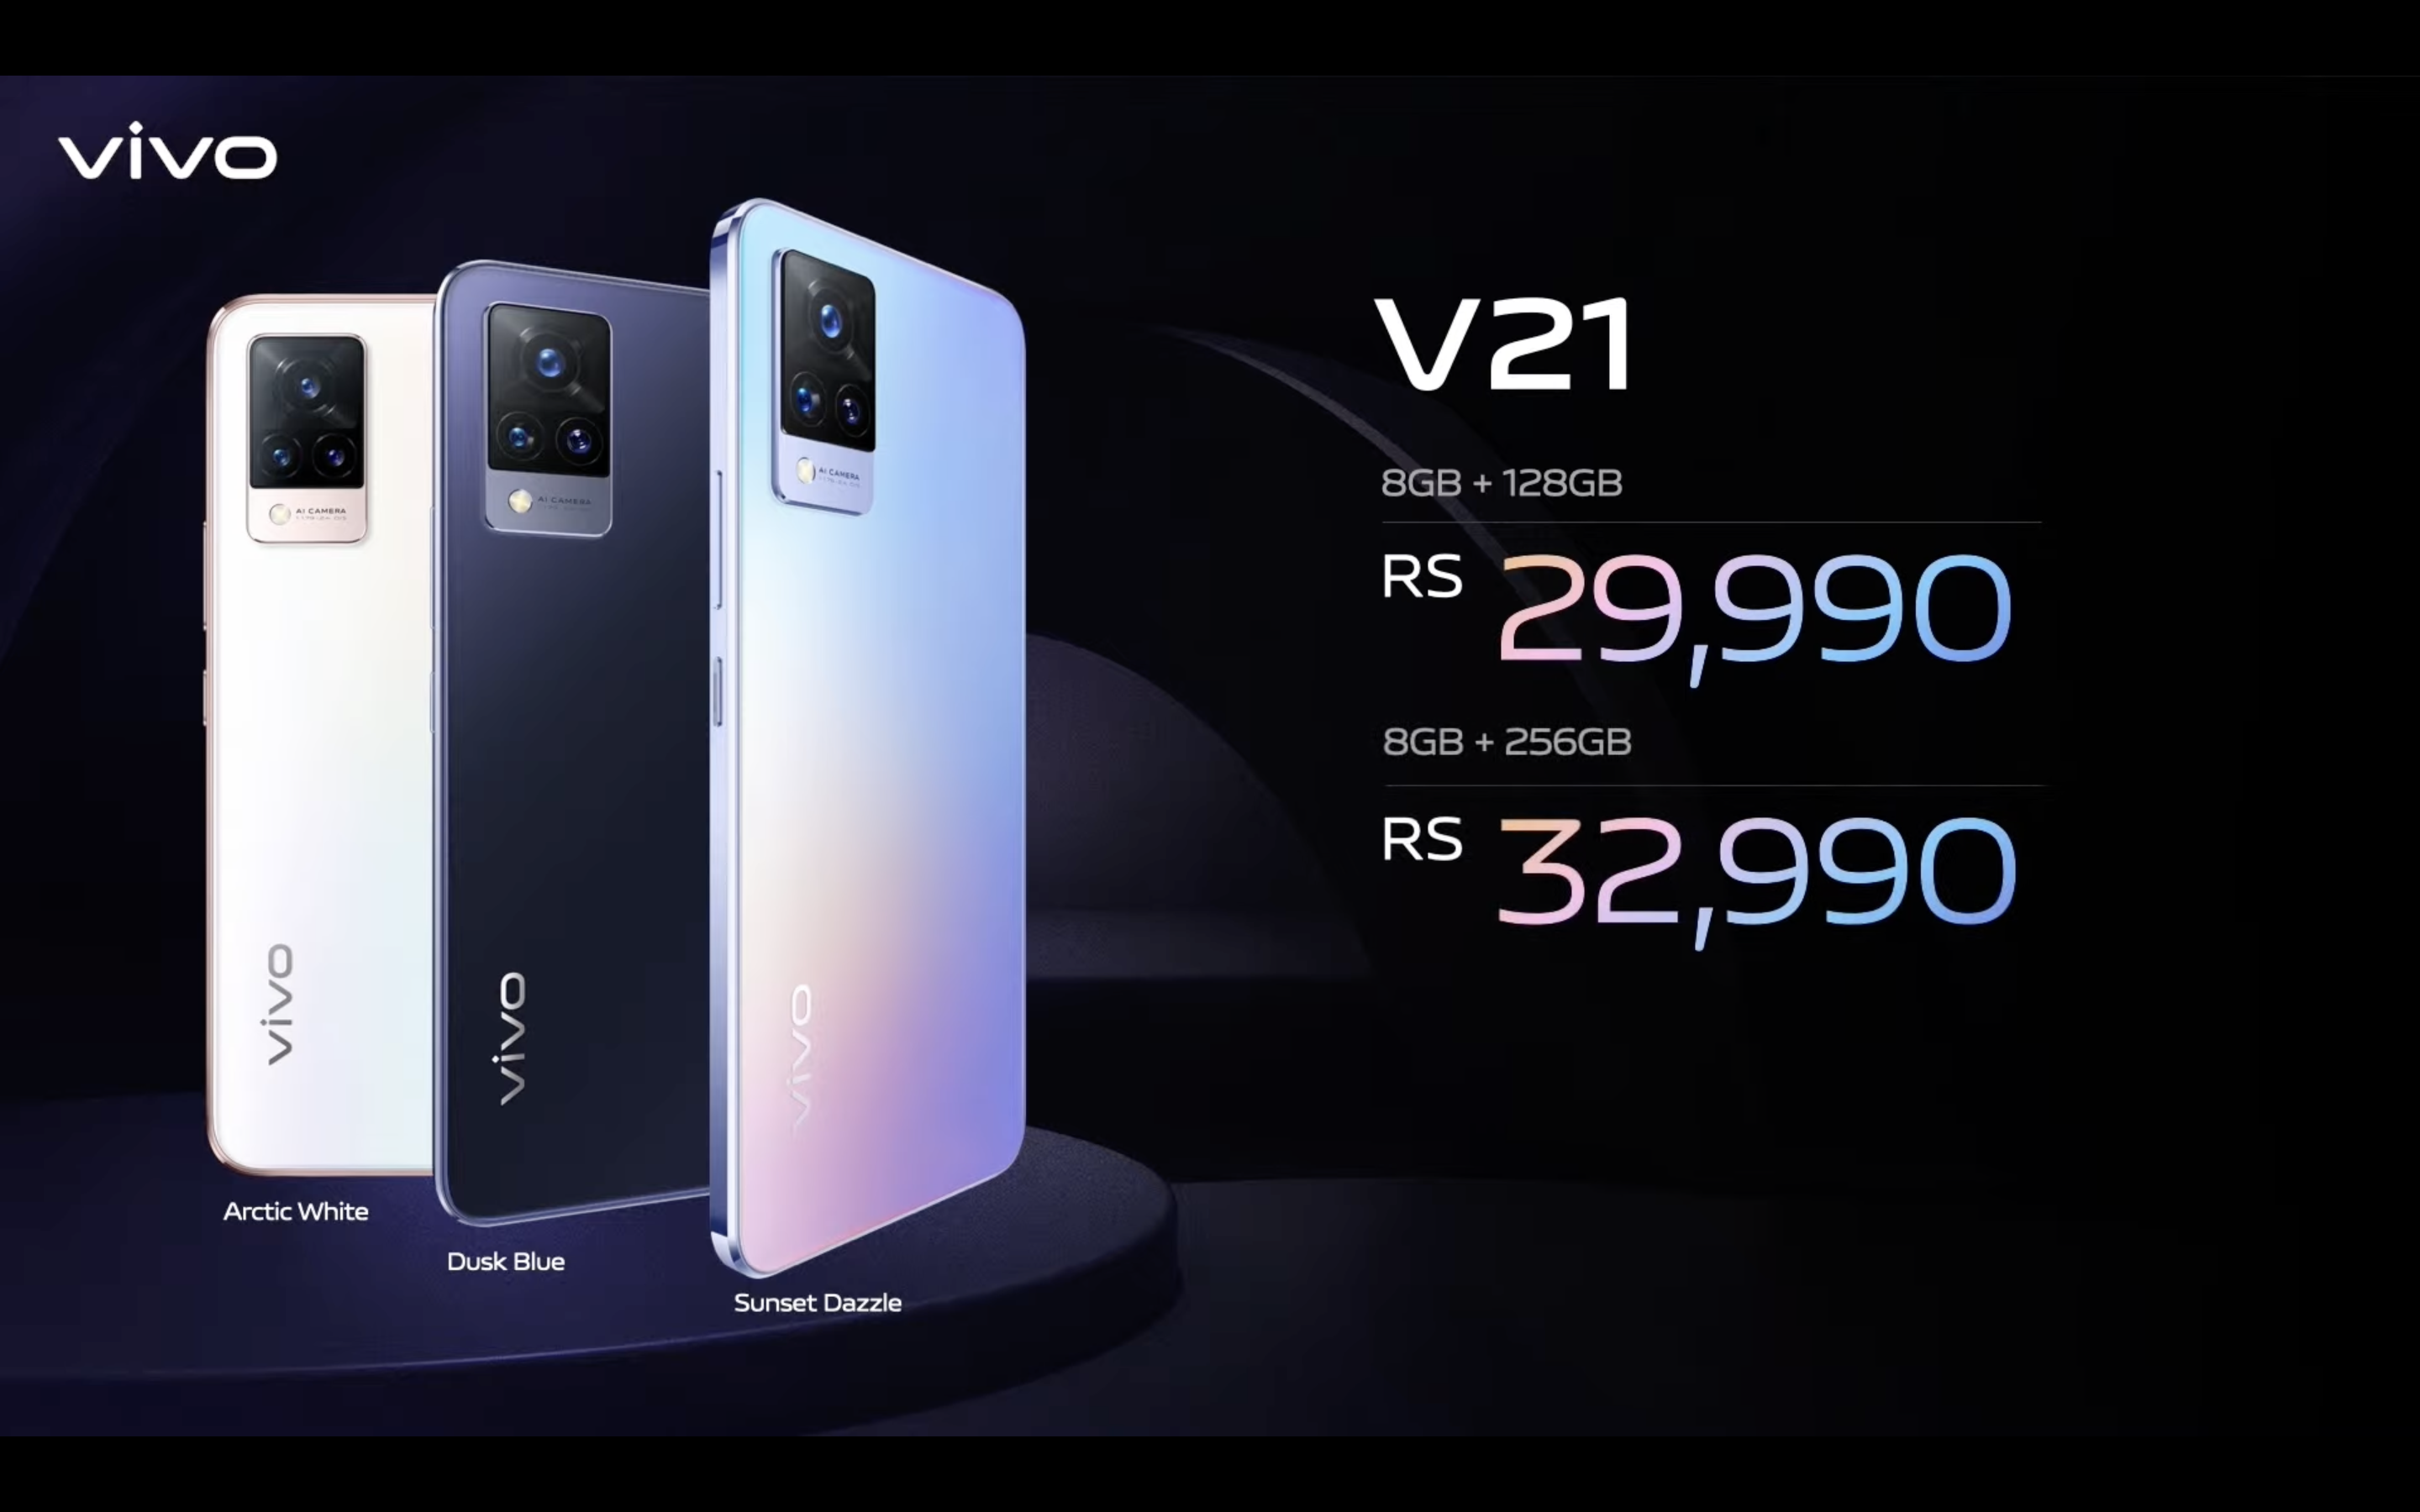 Vivo V21 5G launch highlights: Priced starting Rs 29,990, pre-booking starts today